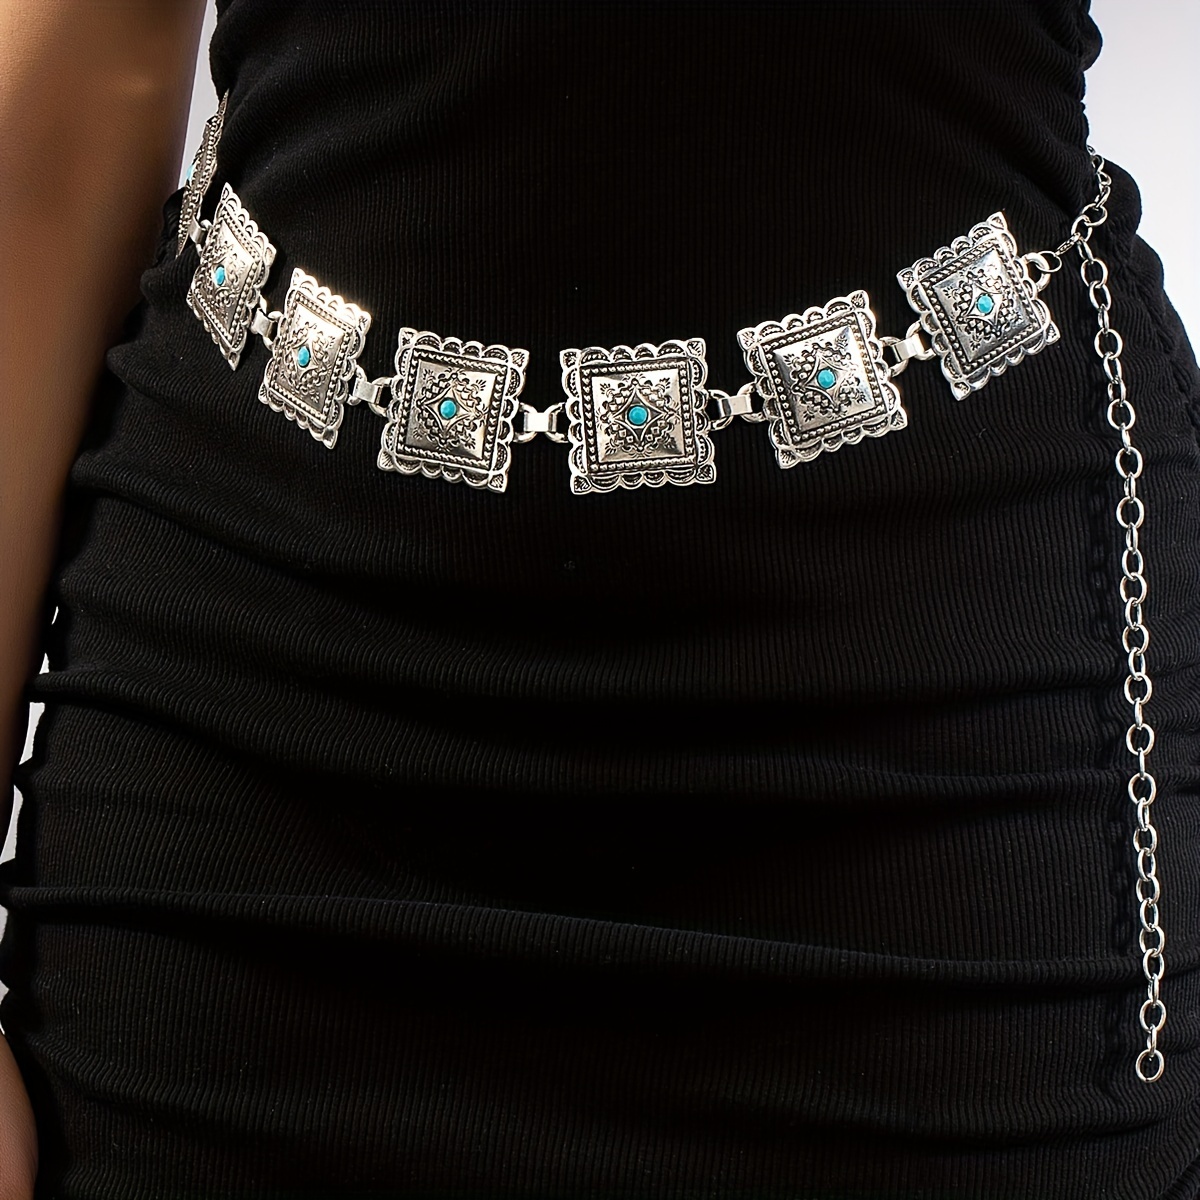 

1pc Antique Silvery Concho Belt Western Style Turquoise Decor Waist Chain Vintage Cowgirl Belt For Dress Jeans